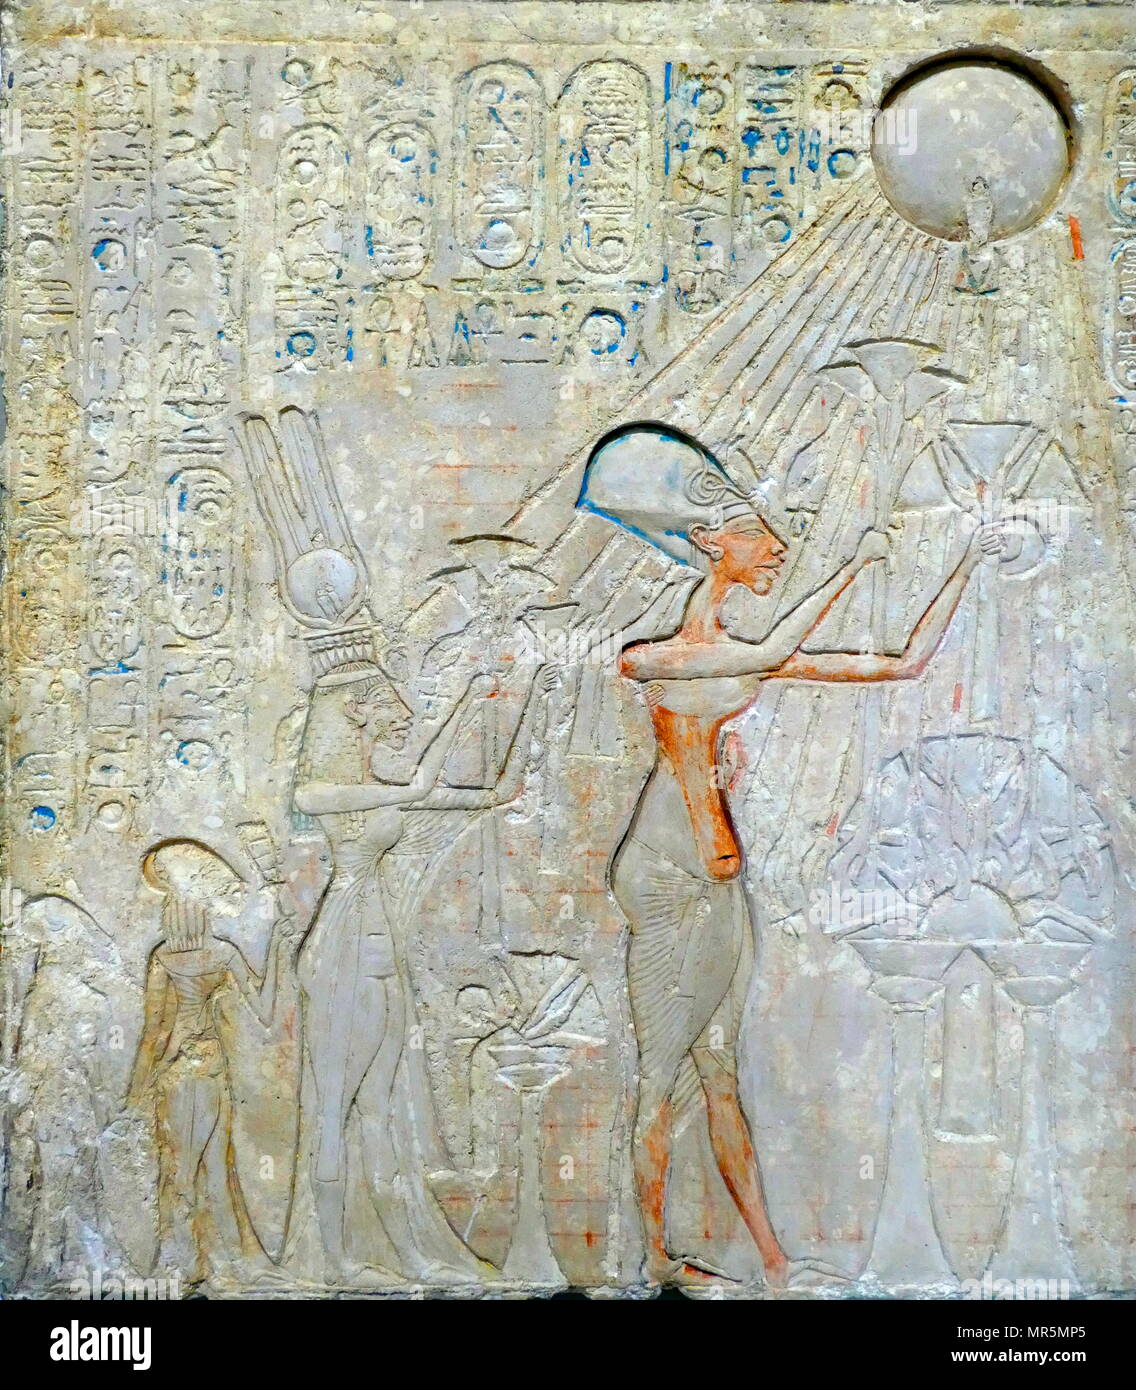 stele representing Akhenaton, Nefertiti and daughters worshiping the Aten sun disk. King Akhenaten, ruled Egypt for about 17 years: He changed the state cult of Amun Ra to that of Aten, and moved the capital from Thebes to Tell el-Amarna. Stock Photo